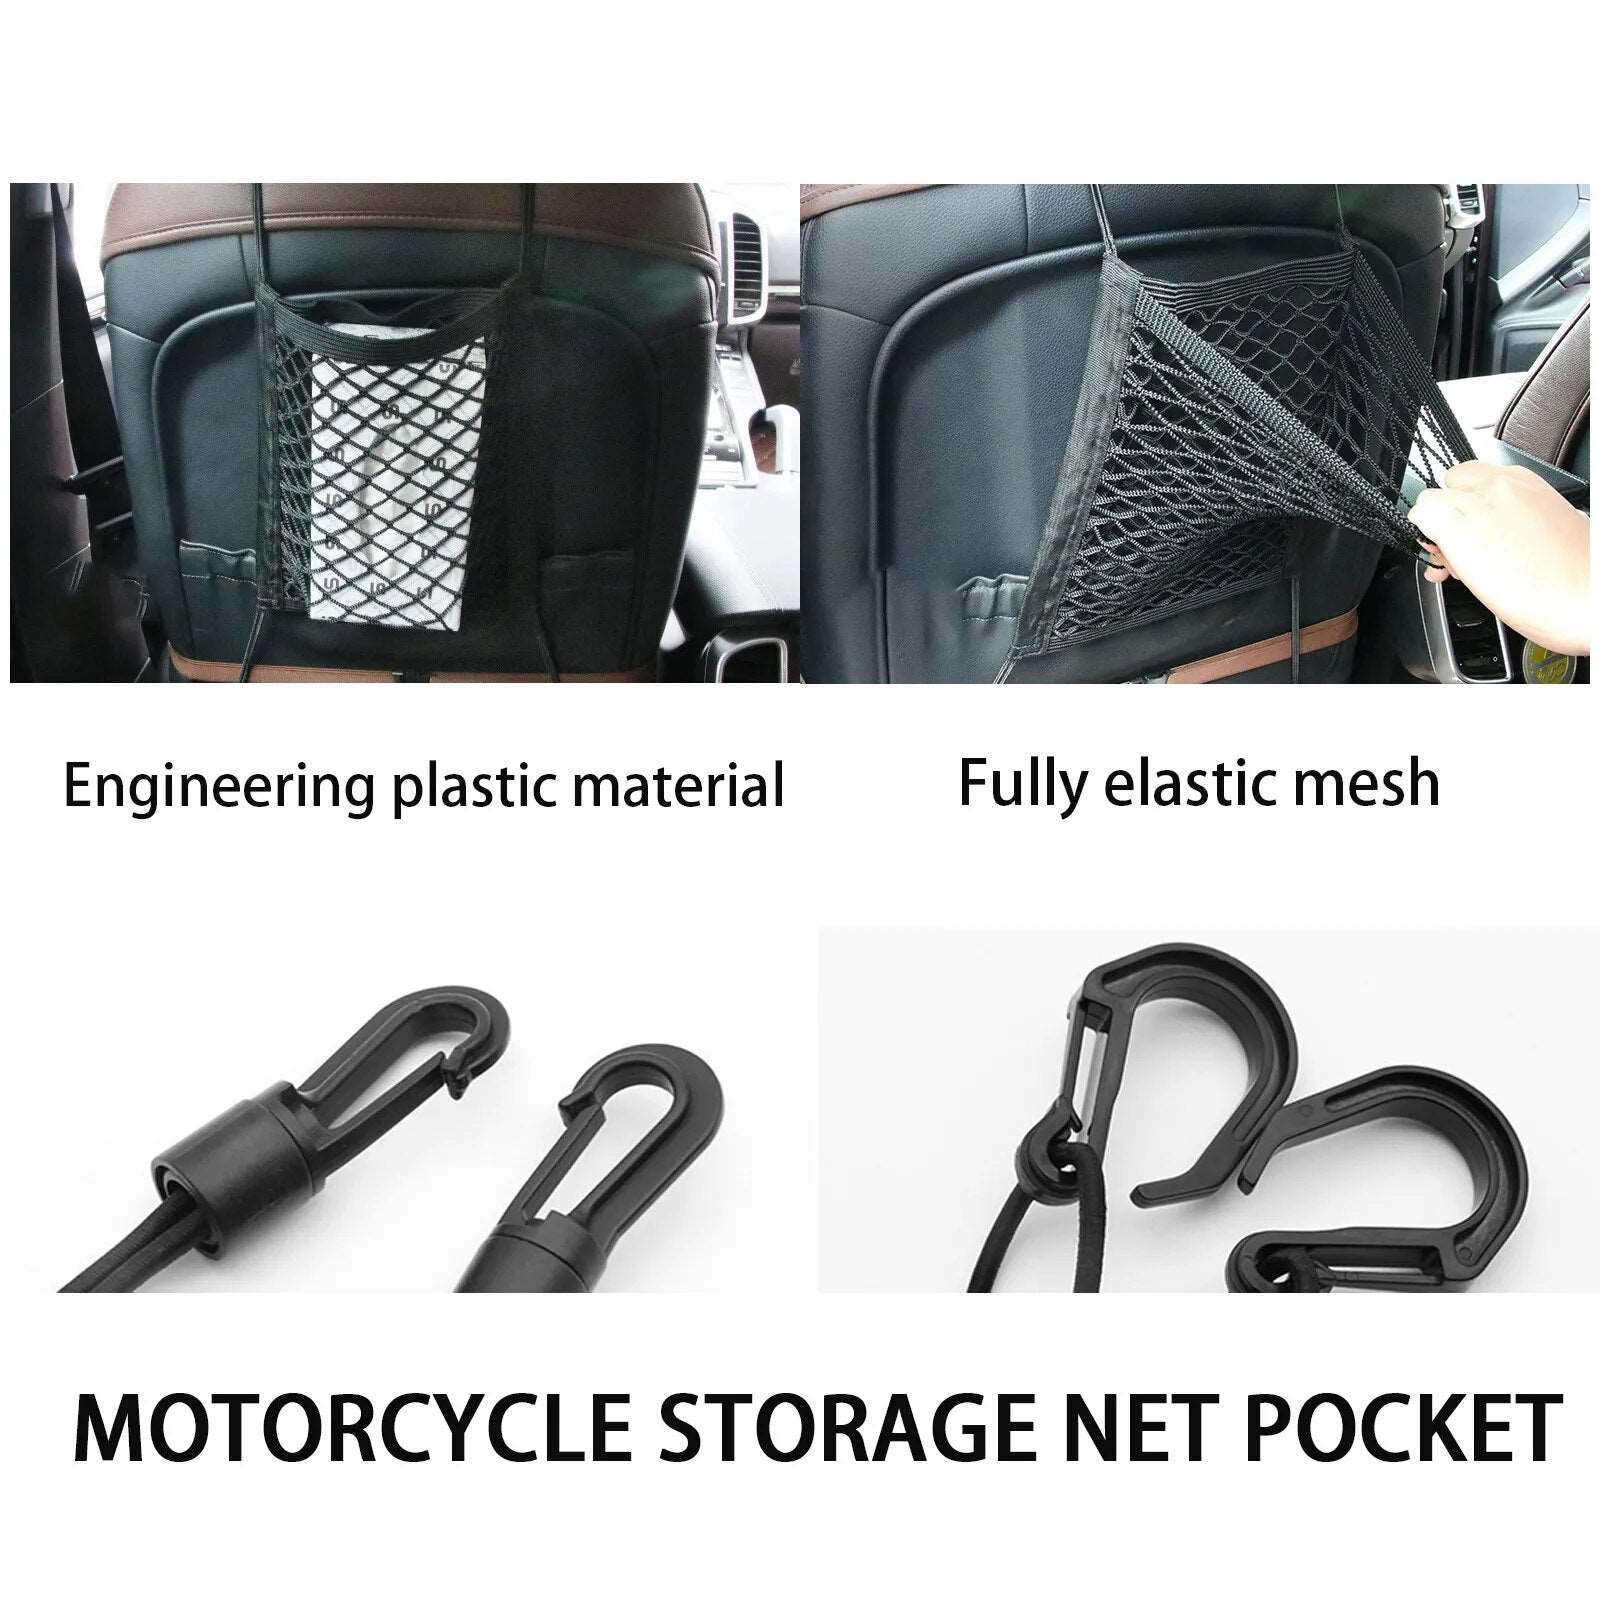 Helmet Cargo Net With Hook and Slots Pockets